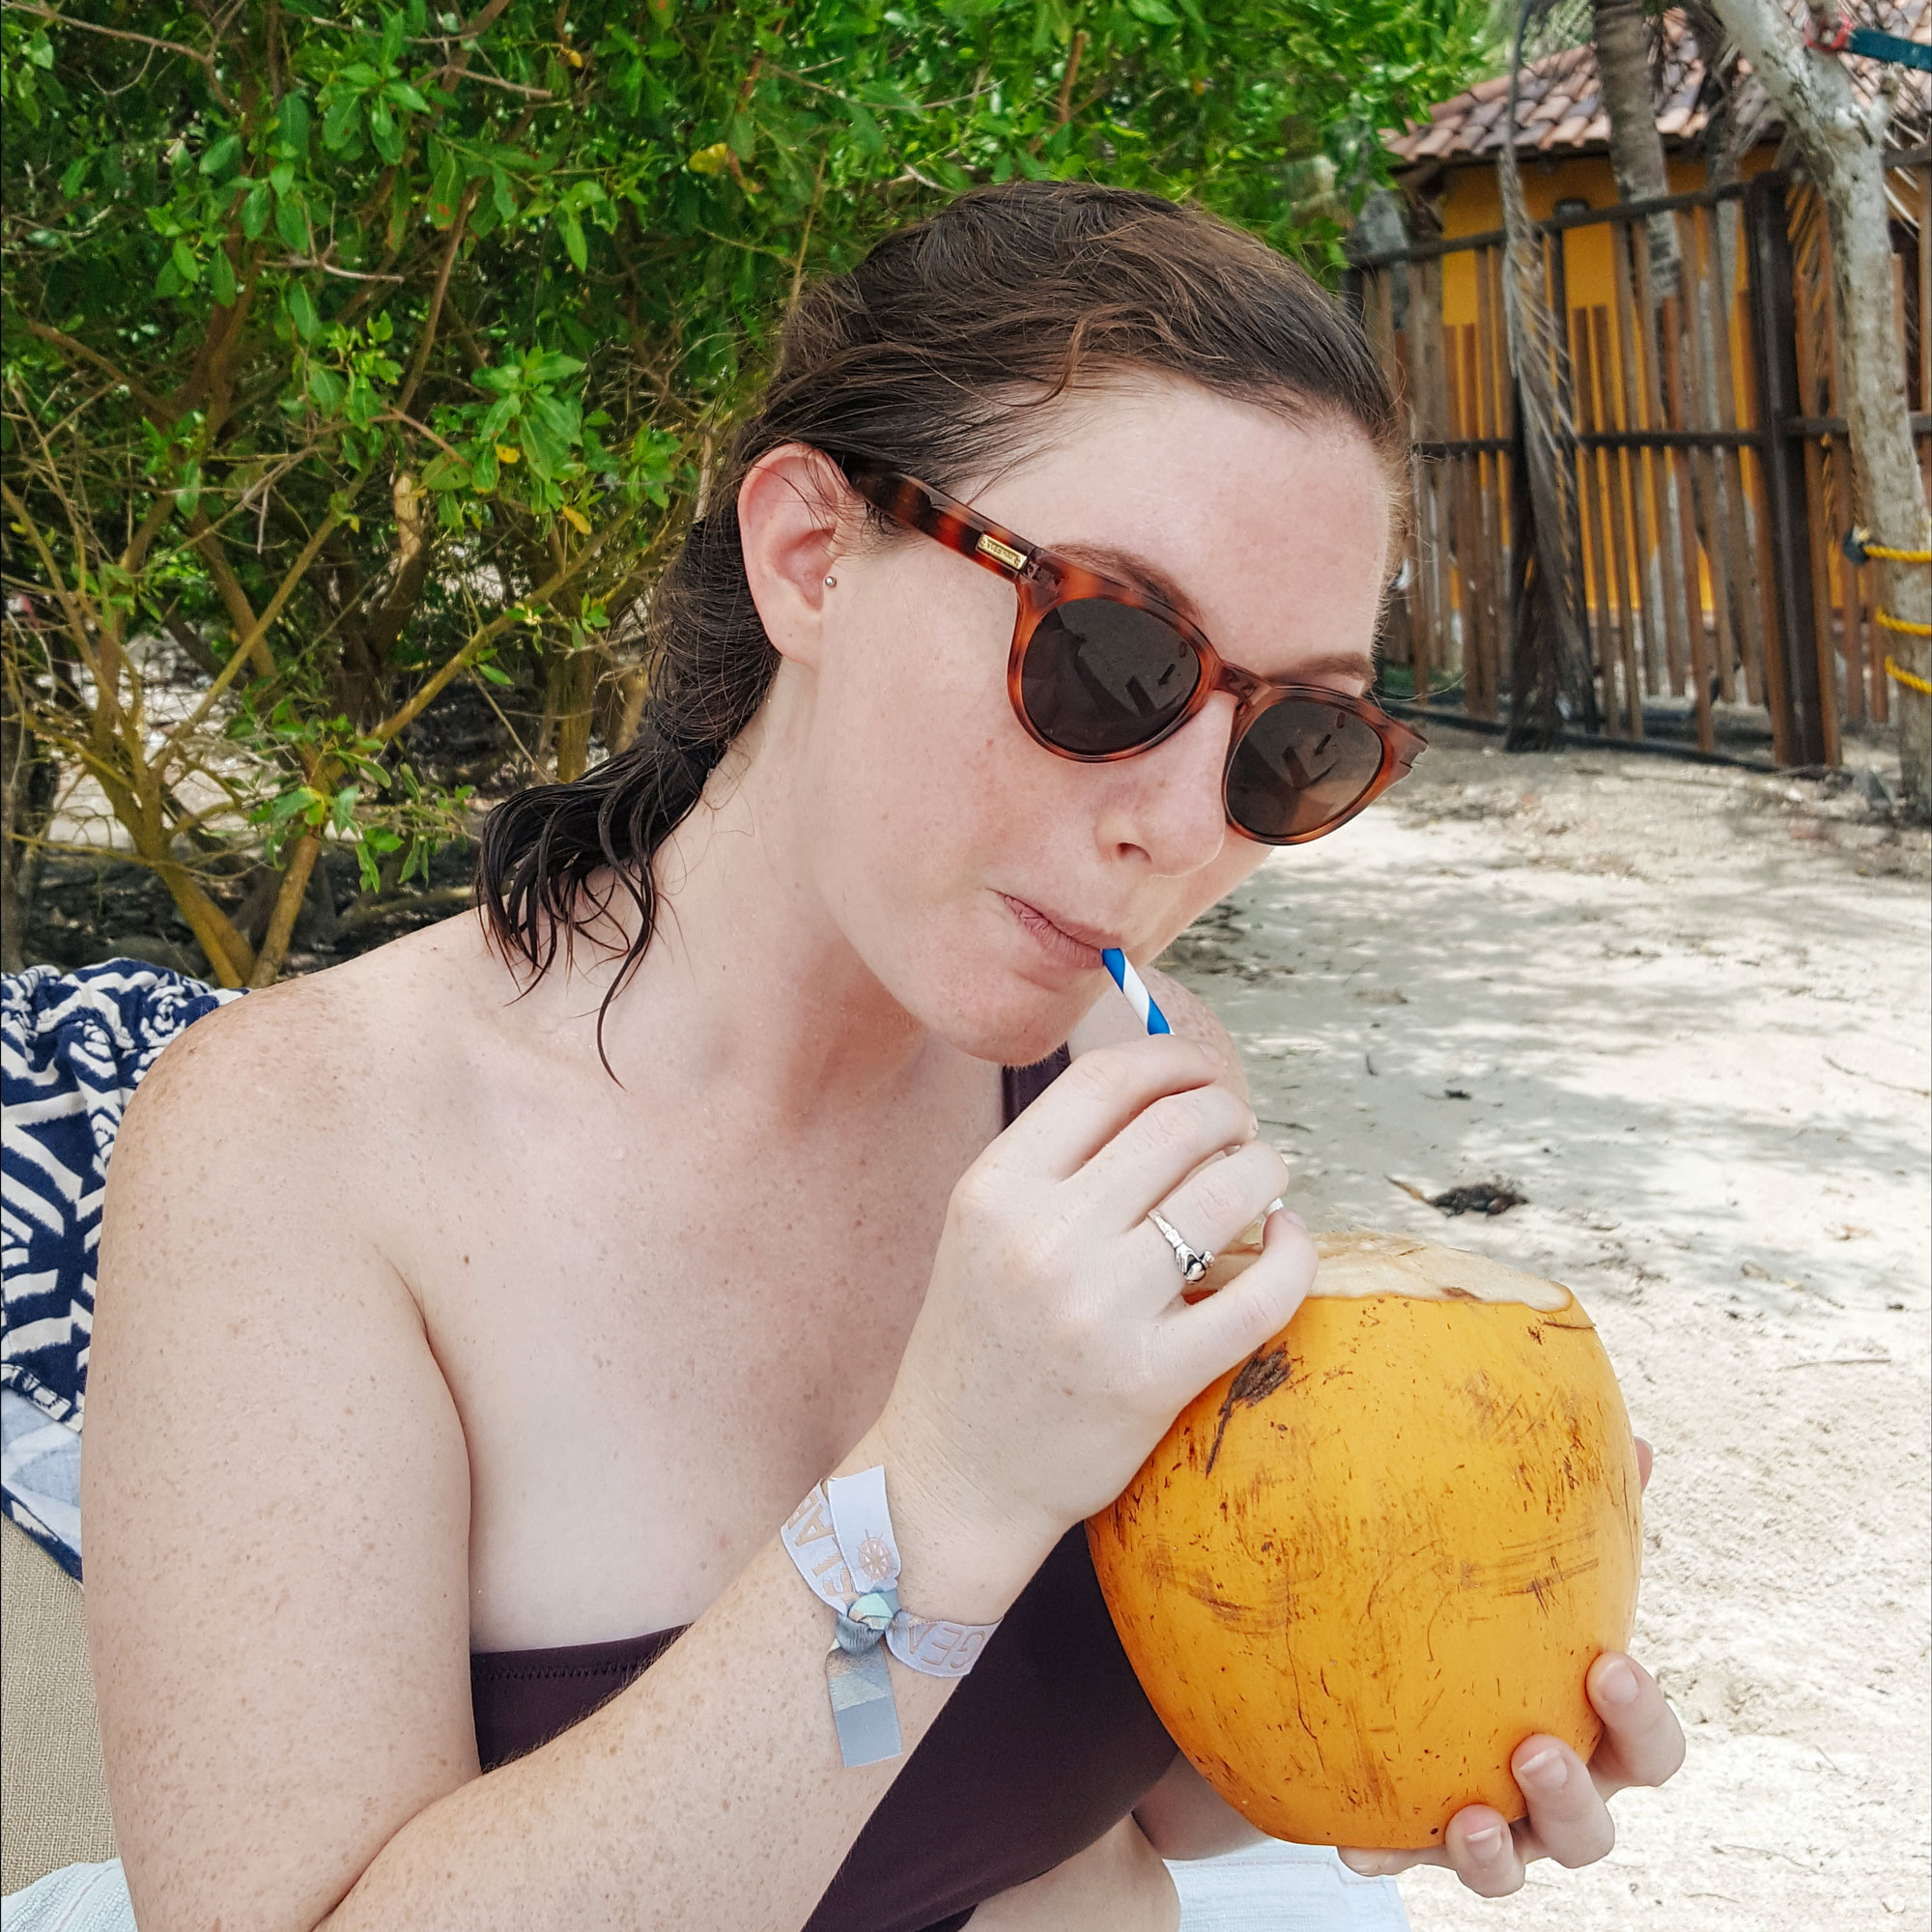 Krystal sipping from a coconut